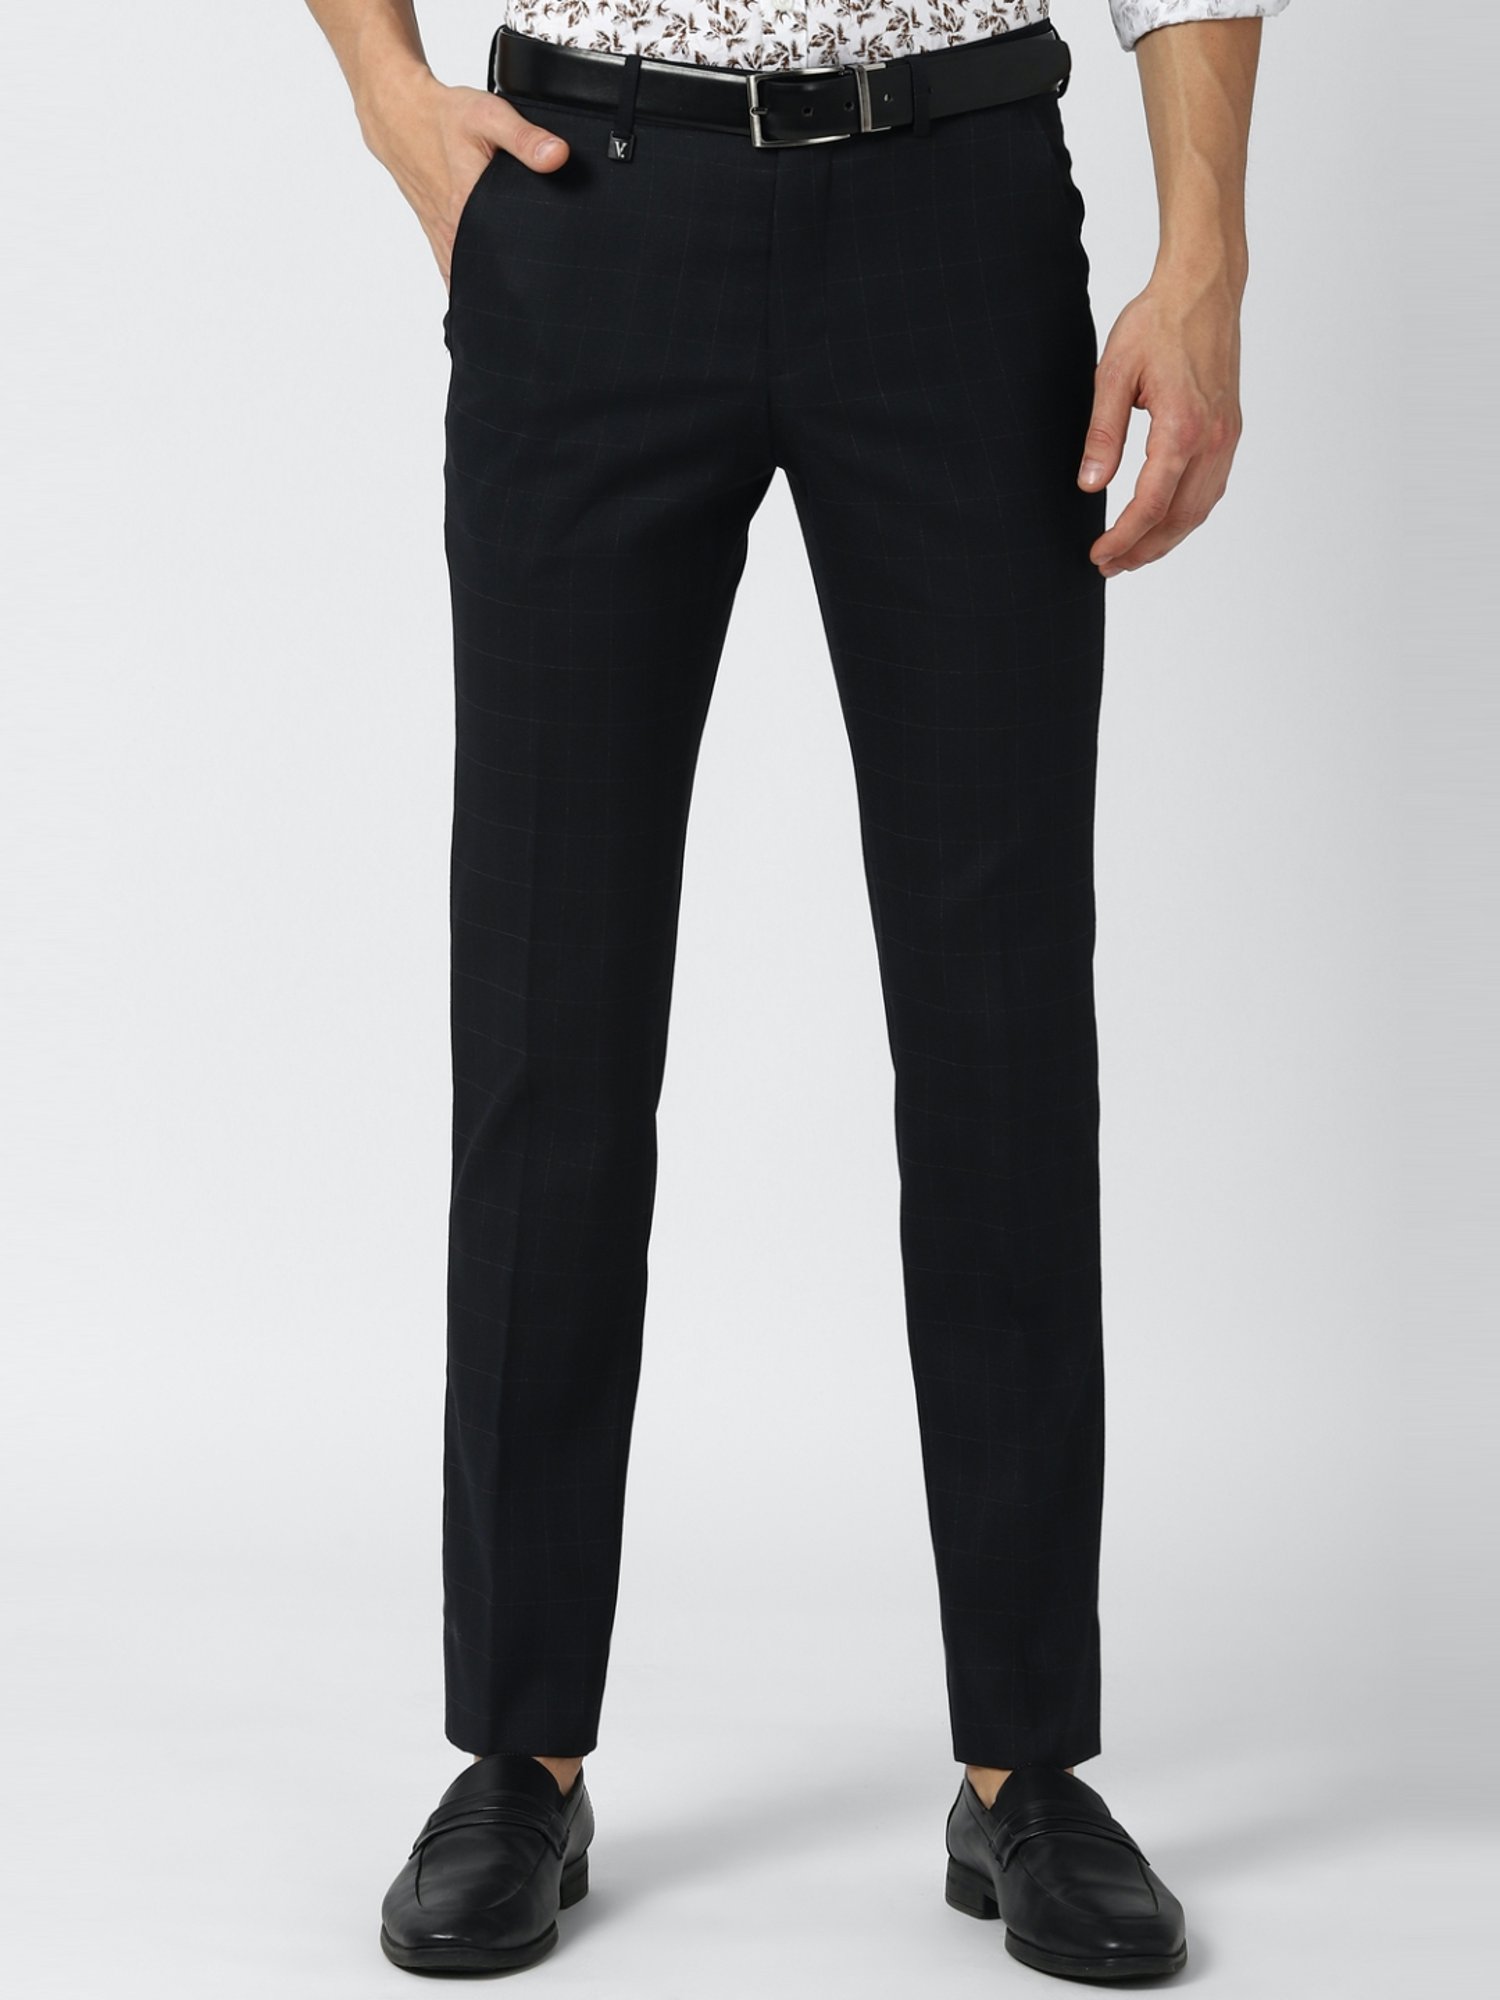 Buy Louis Philippe Black Trousers Online  694027  Louis Philippe